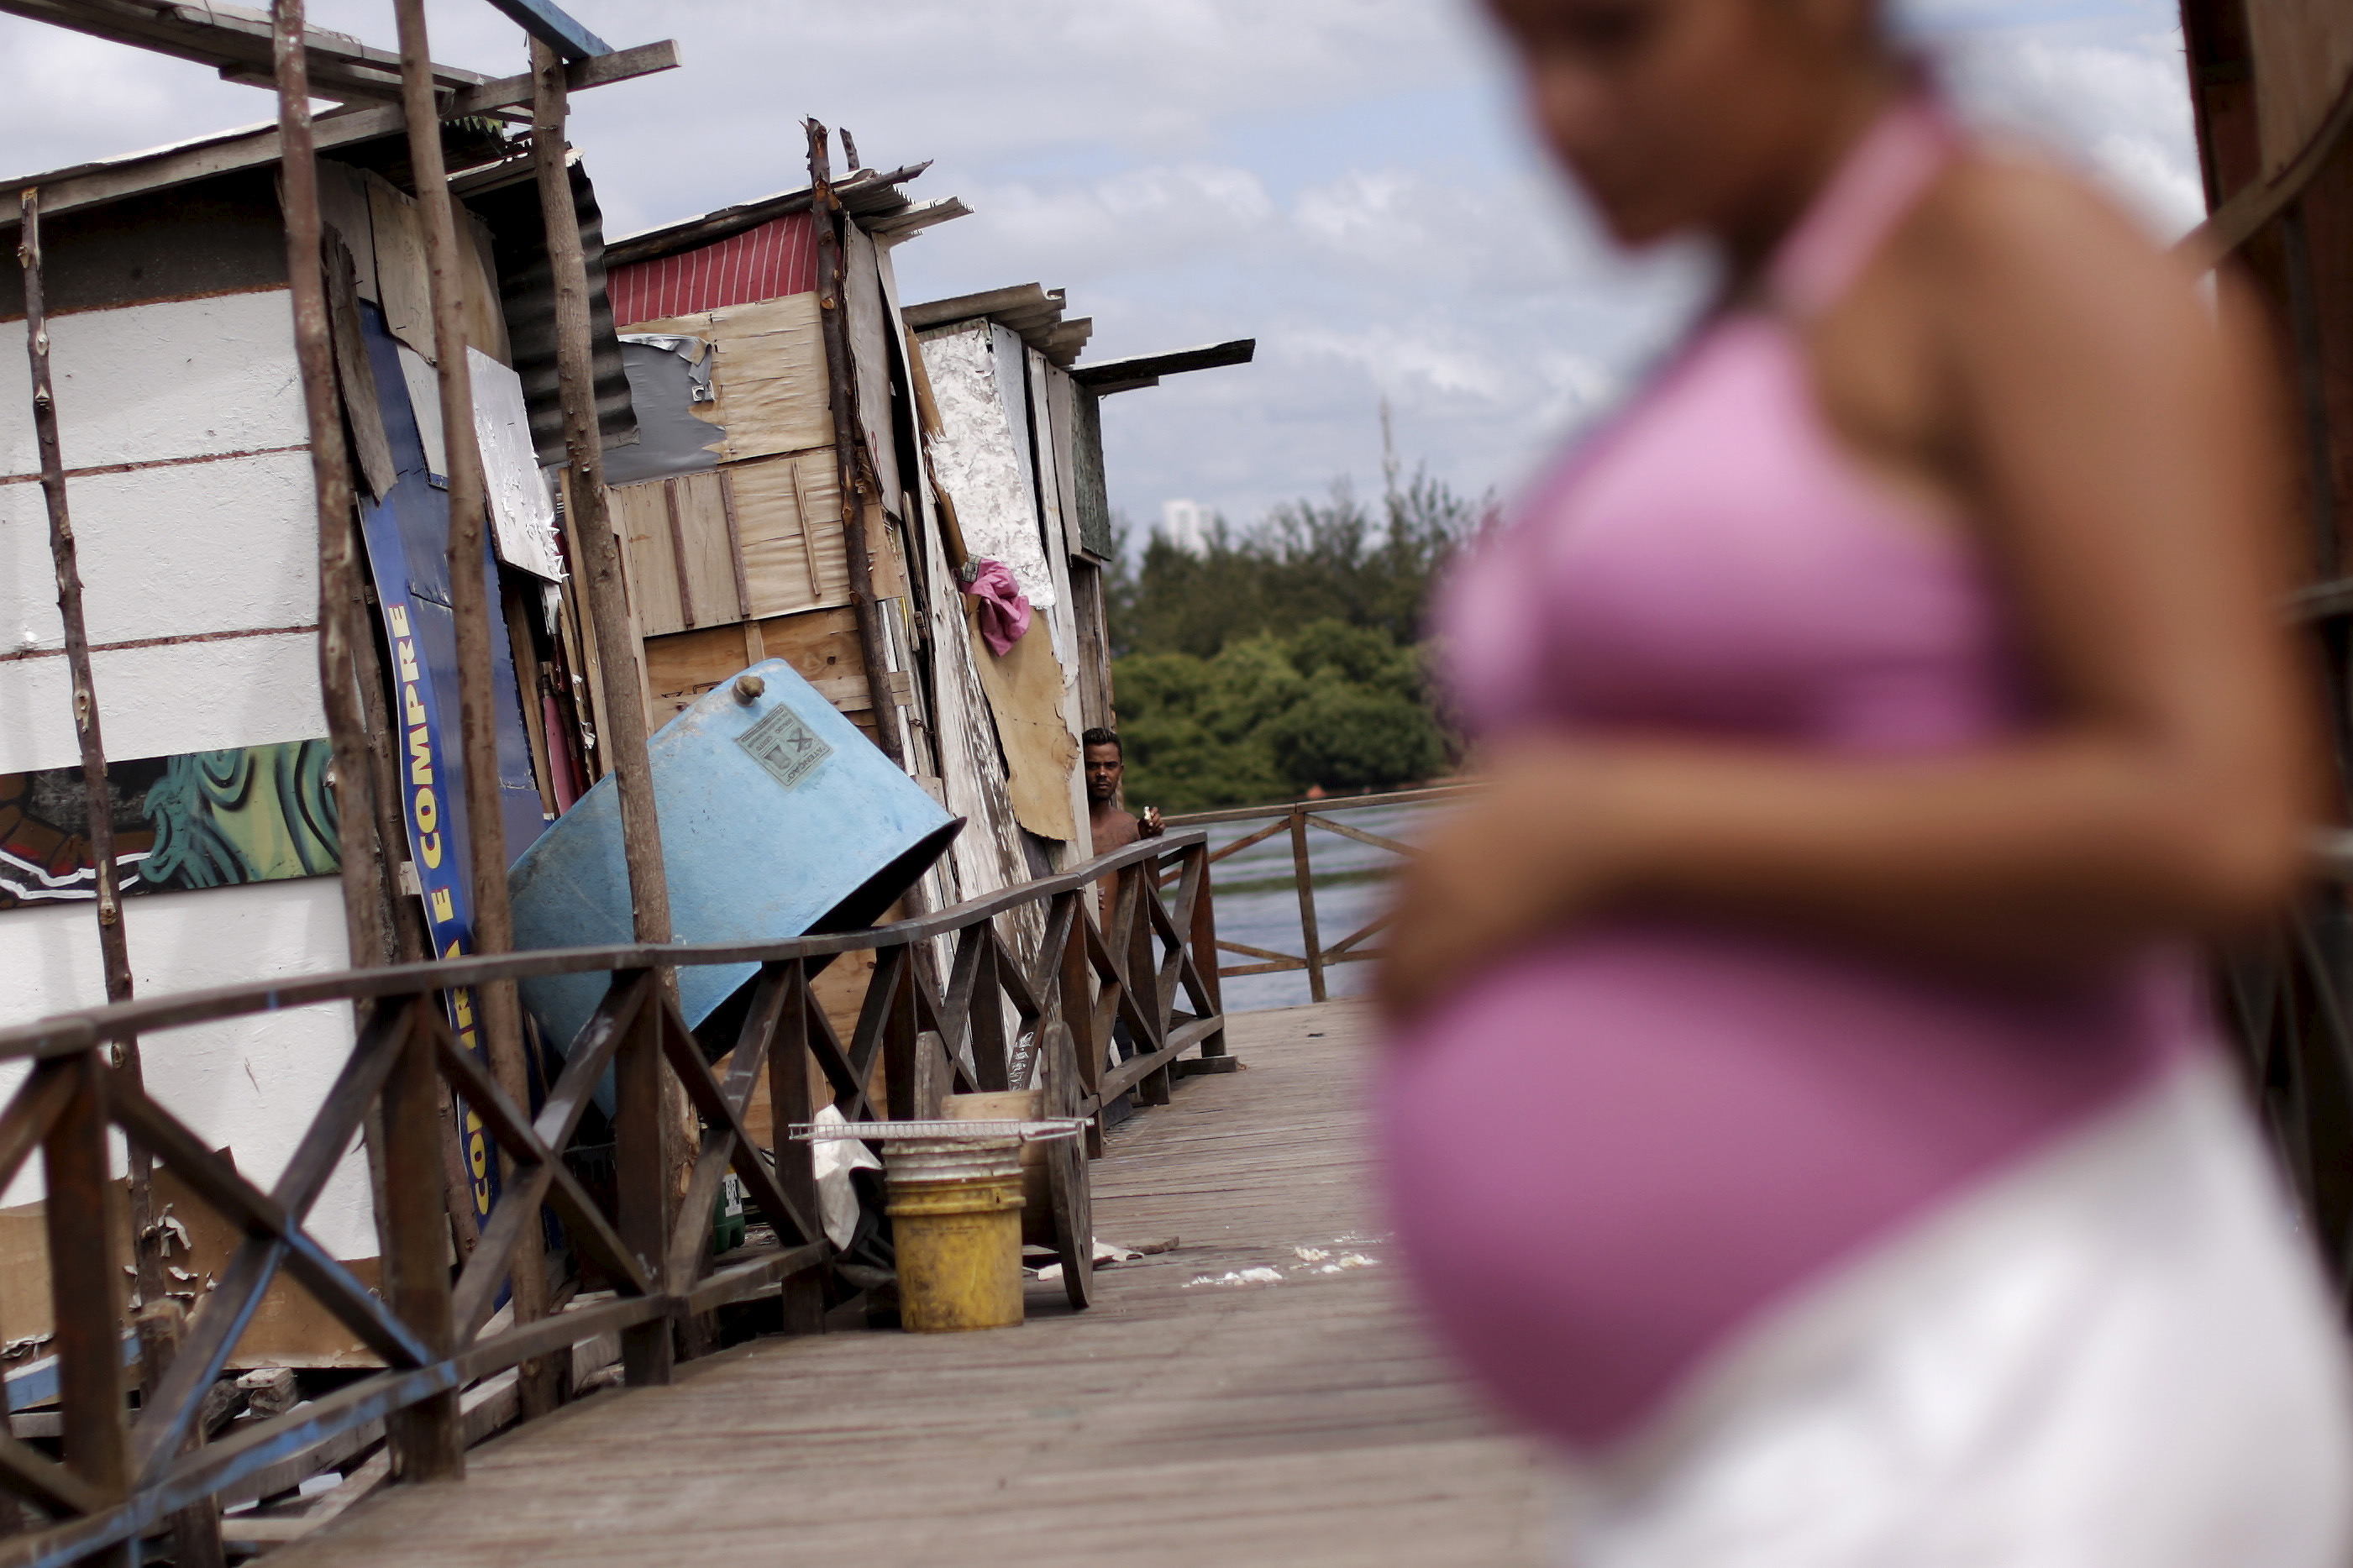 Lediane da Silva, who is 8 months pregnant, is seen in the shanty town of Beco do Sururu, Recife, Brazil